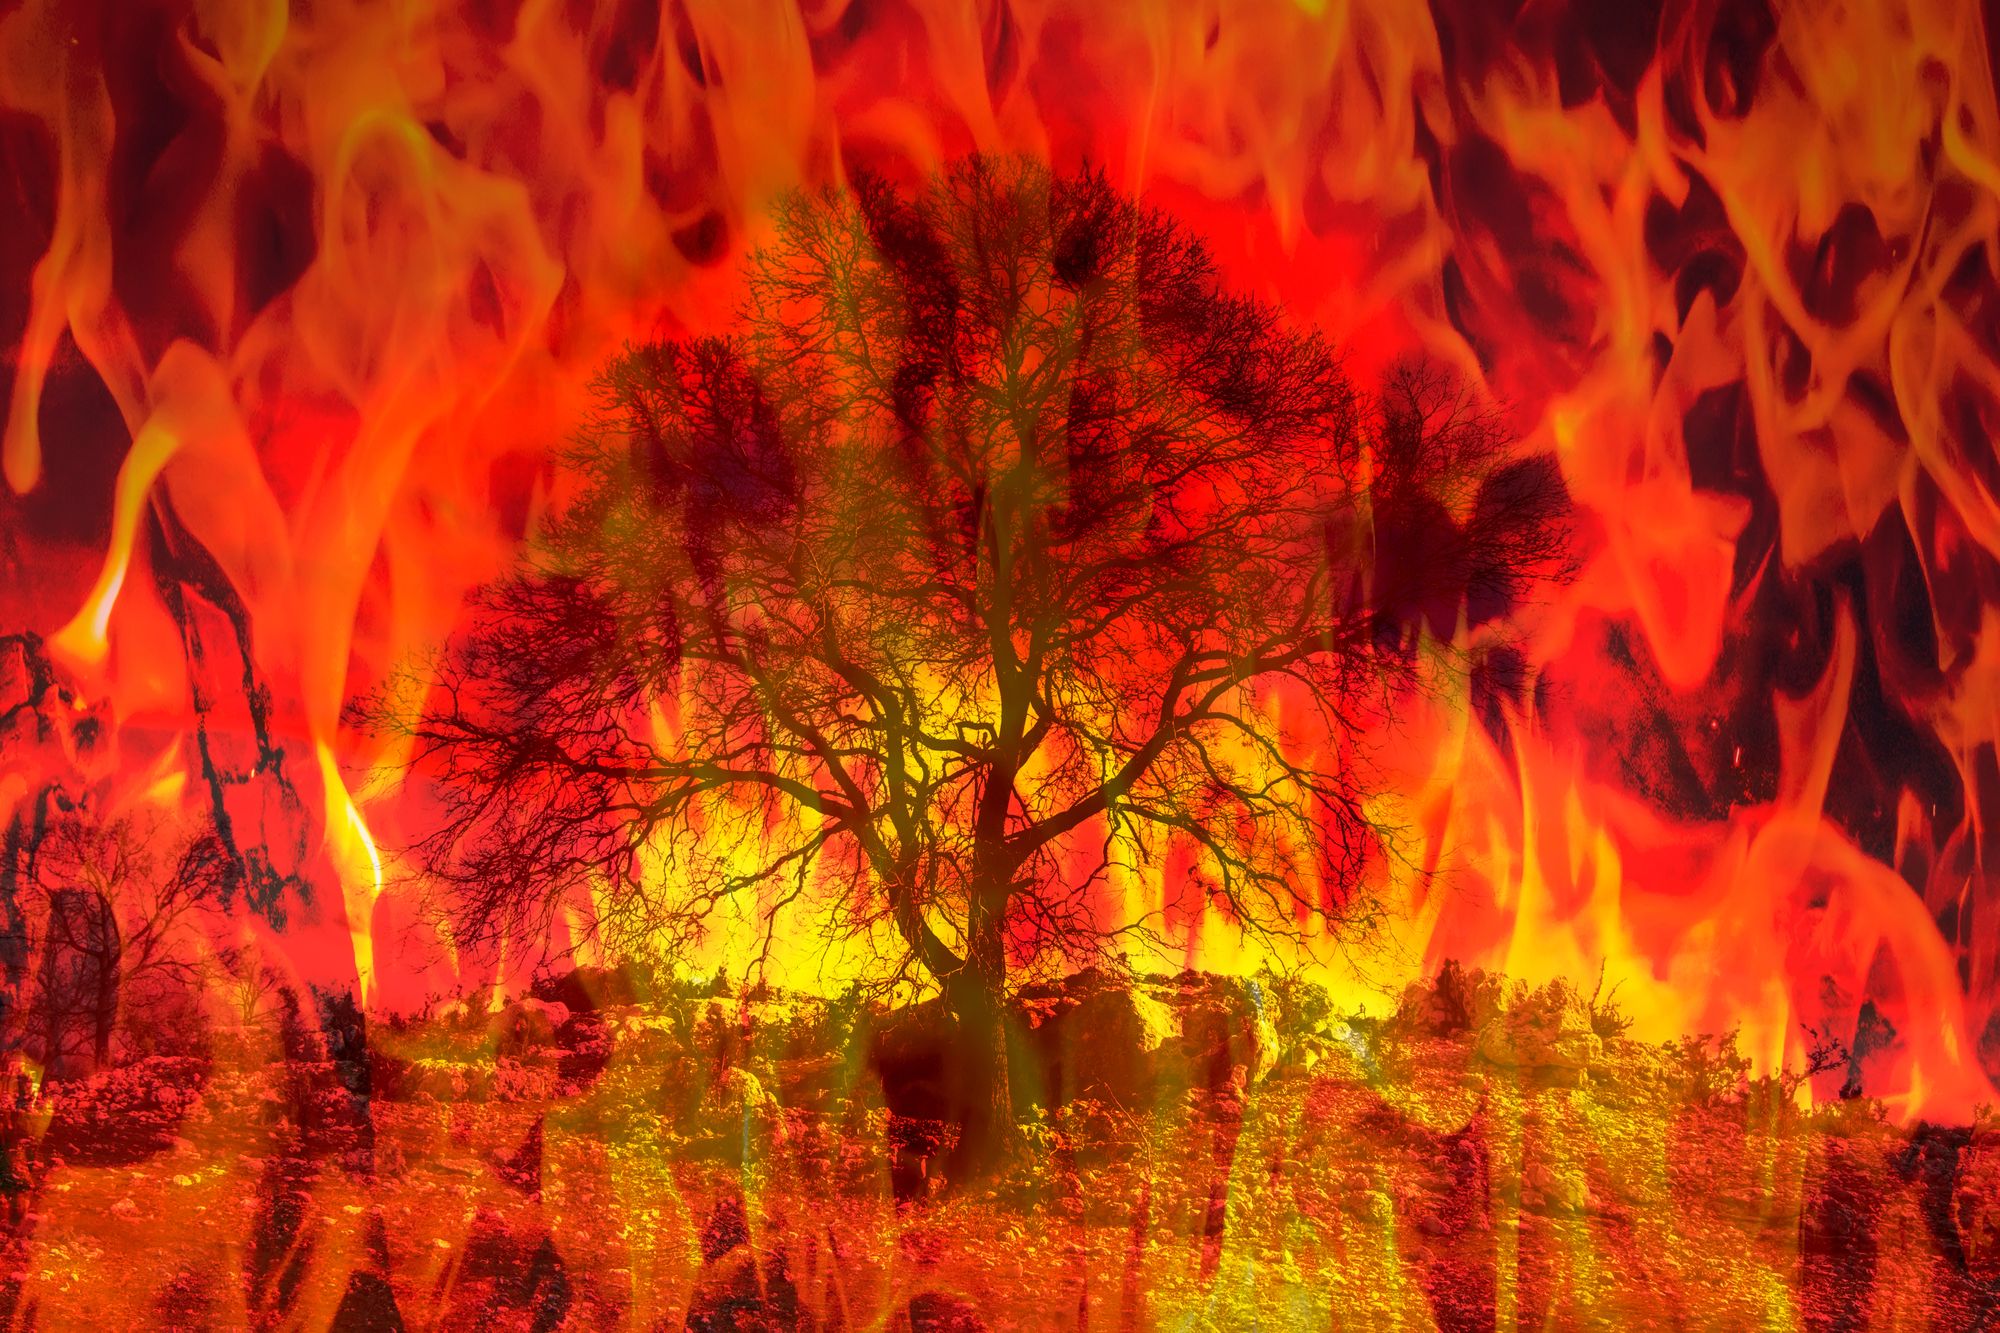 Forest Fire Scene All Trees Burning In Flames In Bushfire 3d Rendering  Stock Photo - Download Image Now - iStock